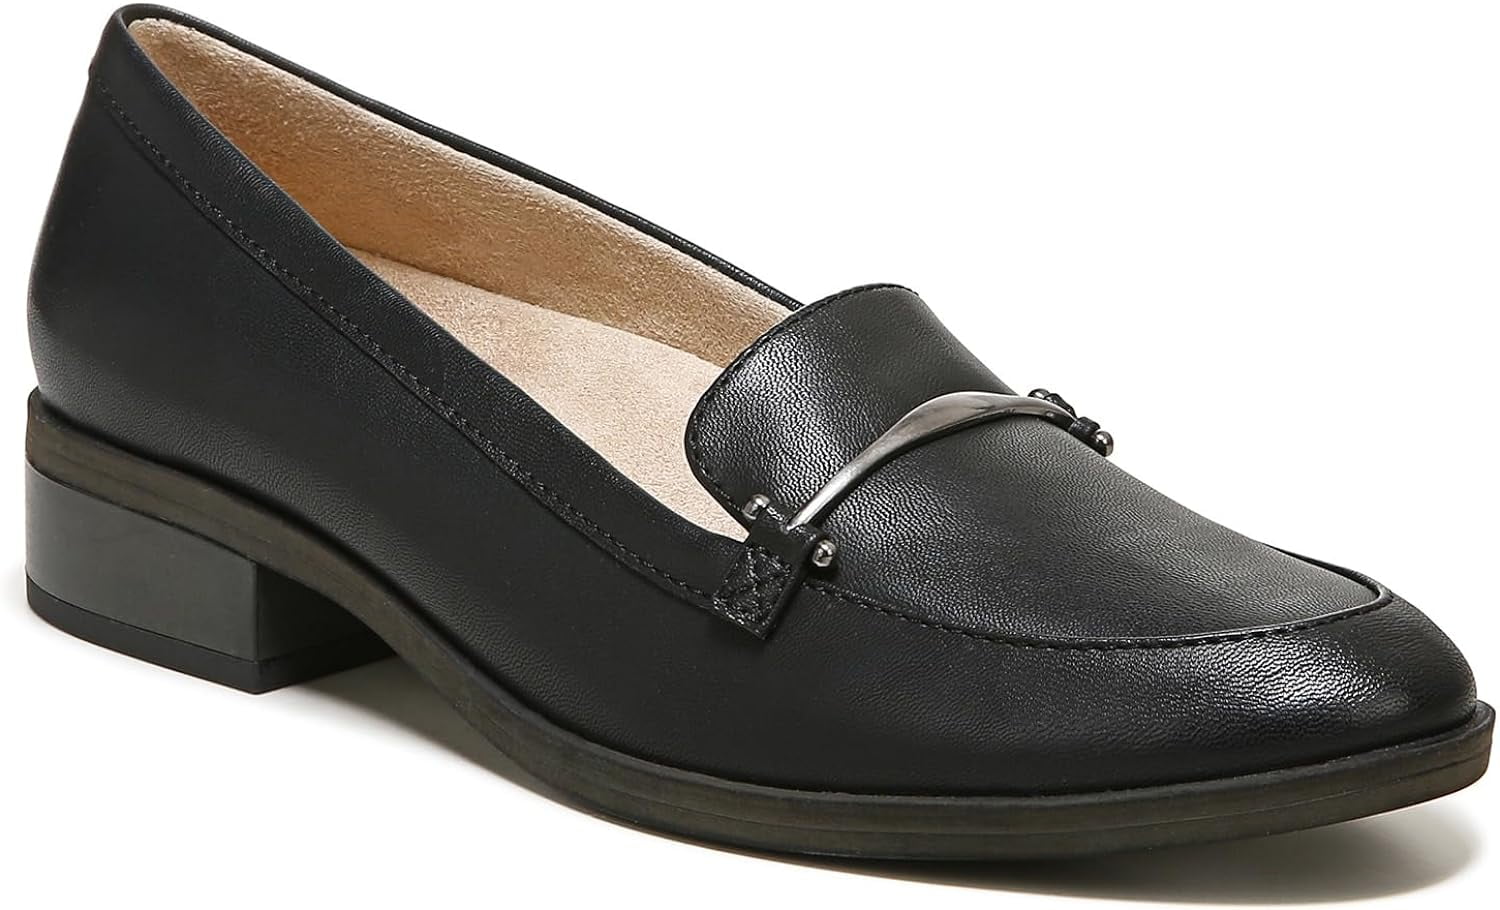 Soul by Naturalizer Women's Ridley Loafers Black Smooth 10M - Walmart.com